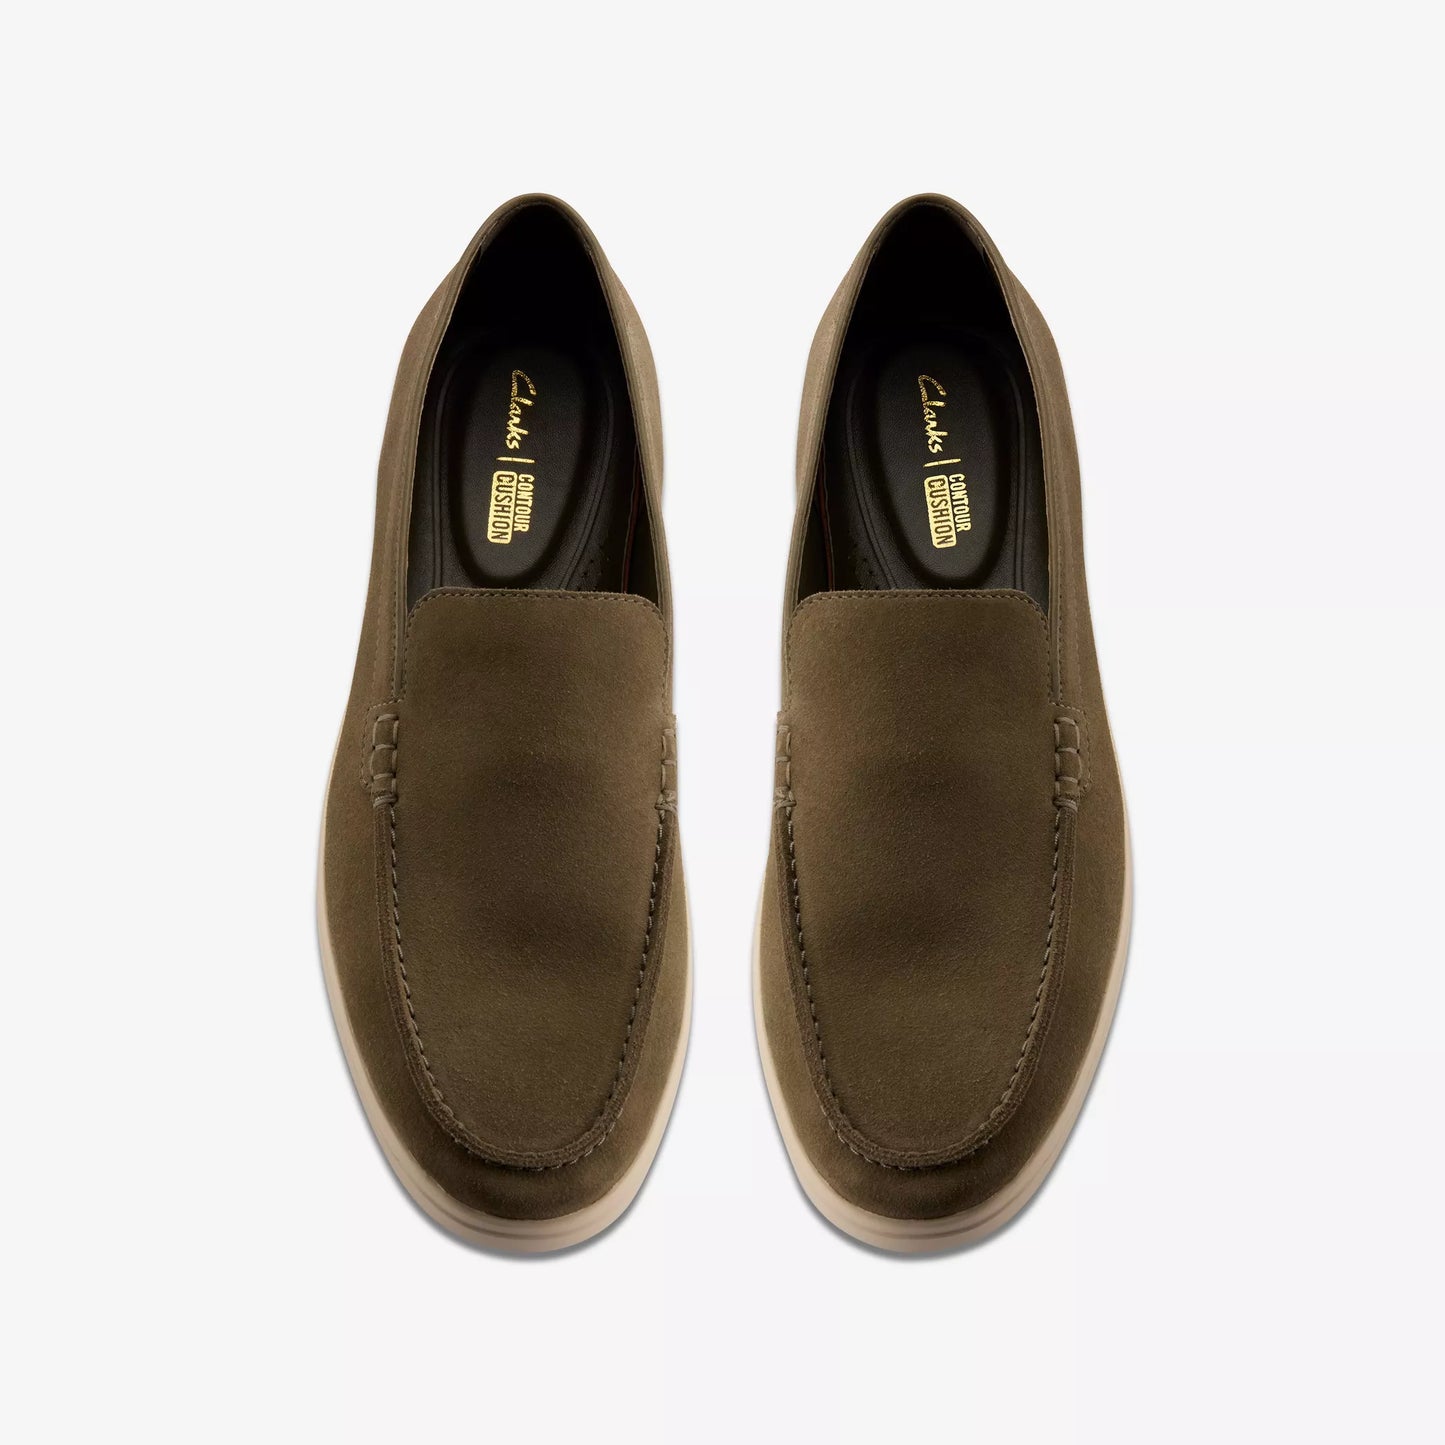 CLARKS | 남자를위한 캐주얼 신발 | TORFORD EASY OLIVE SUEDE | 녹색